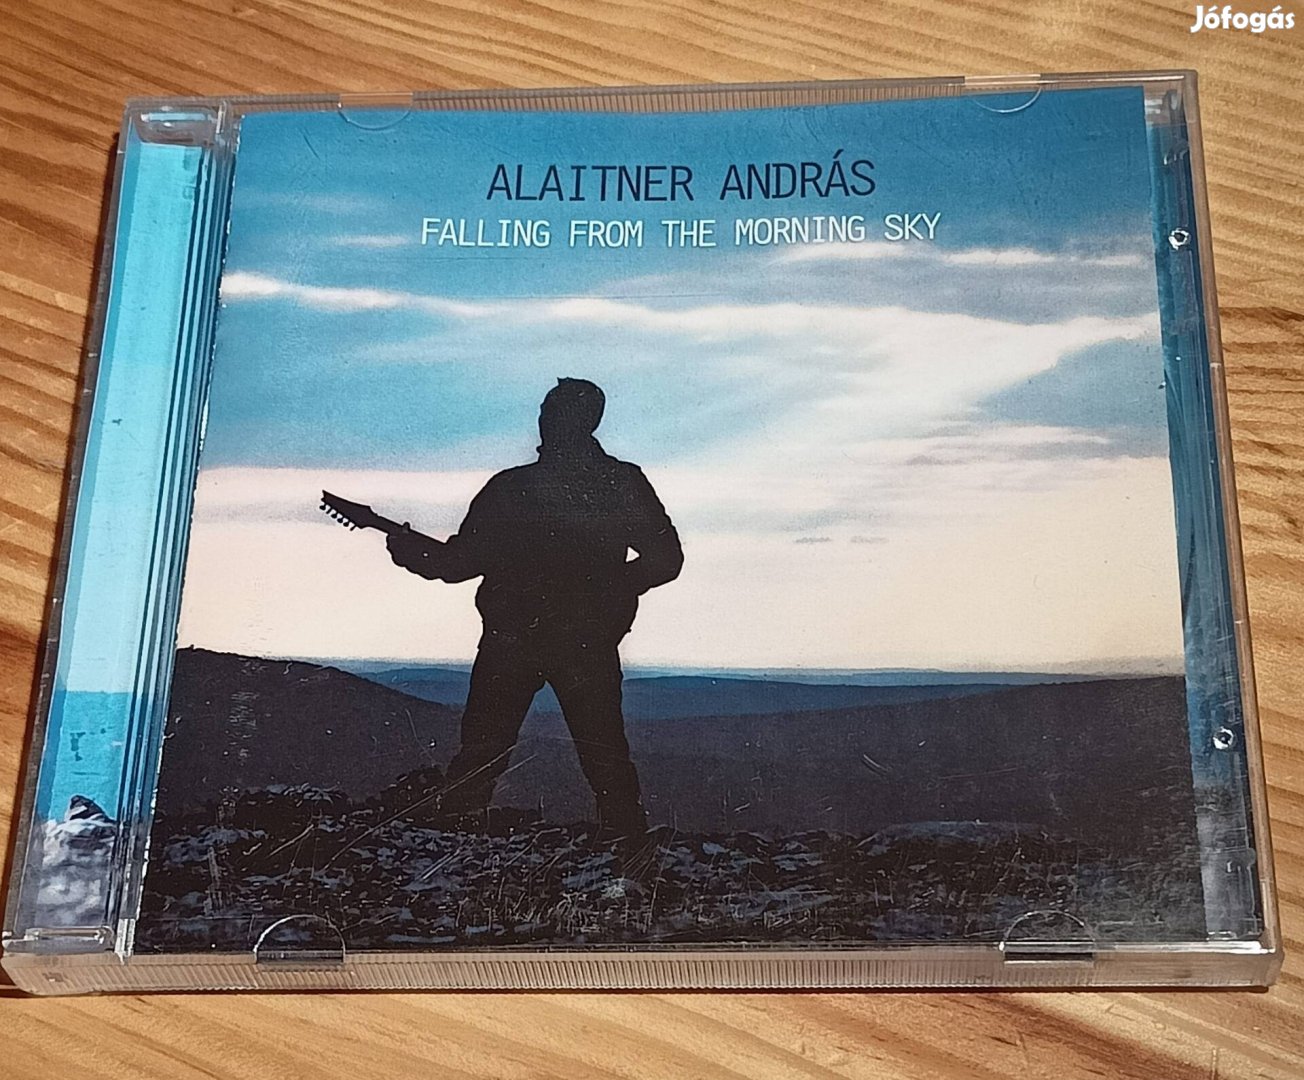 Alaitner András - Falling from the morning sky CD